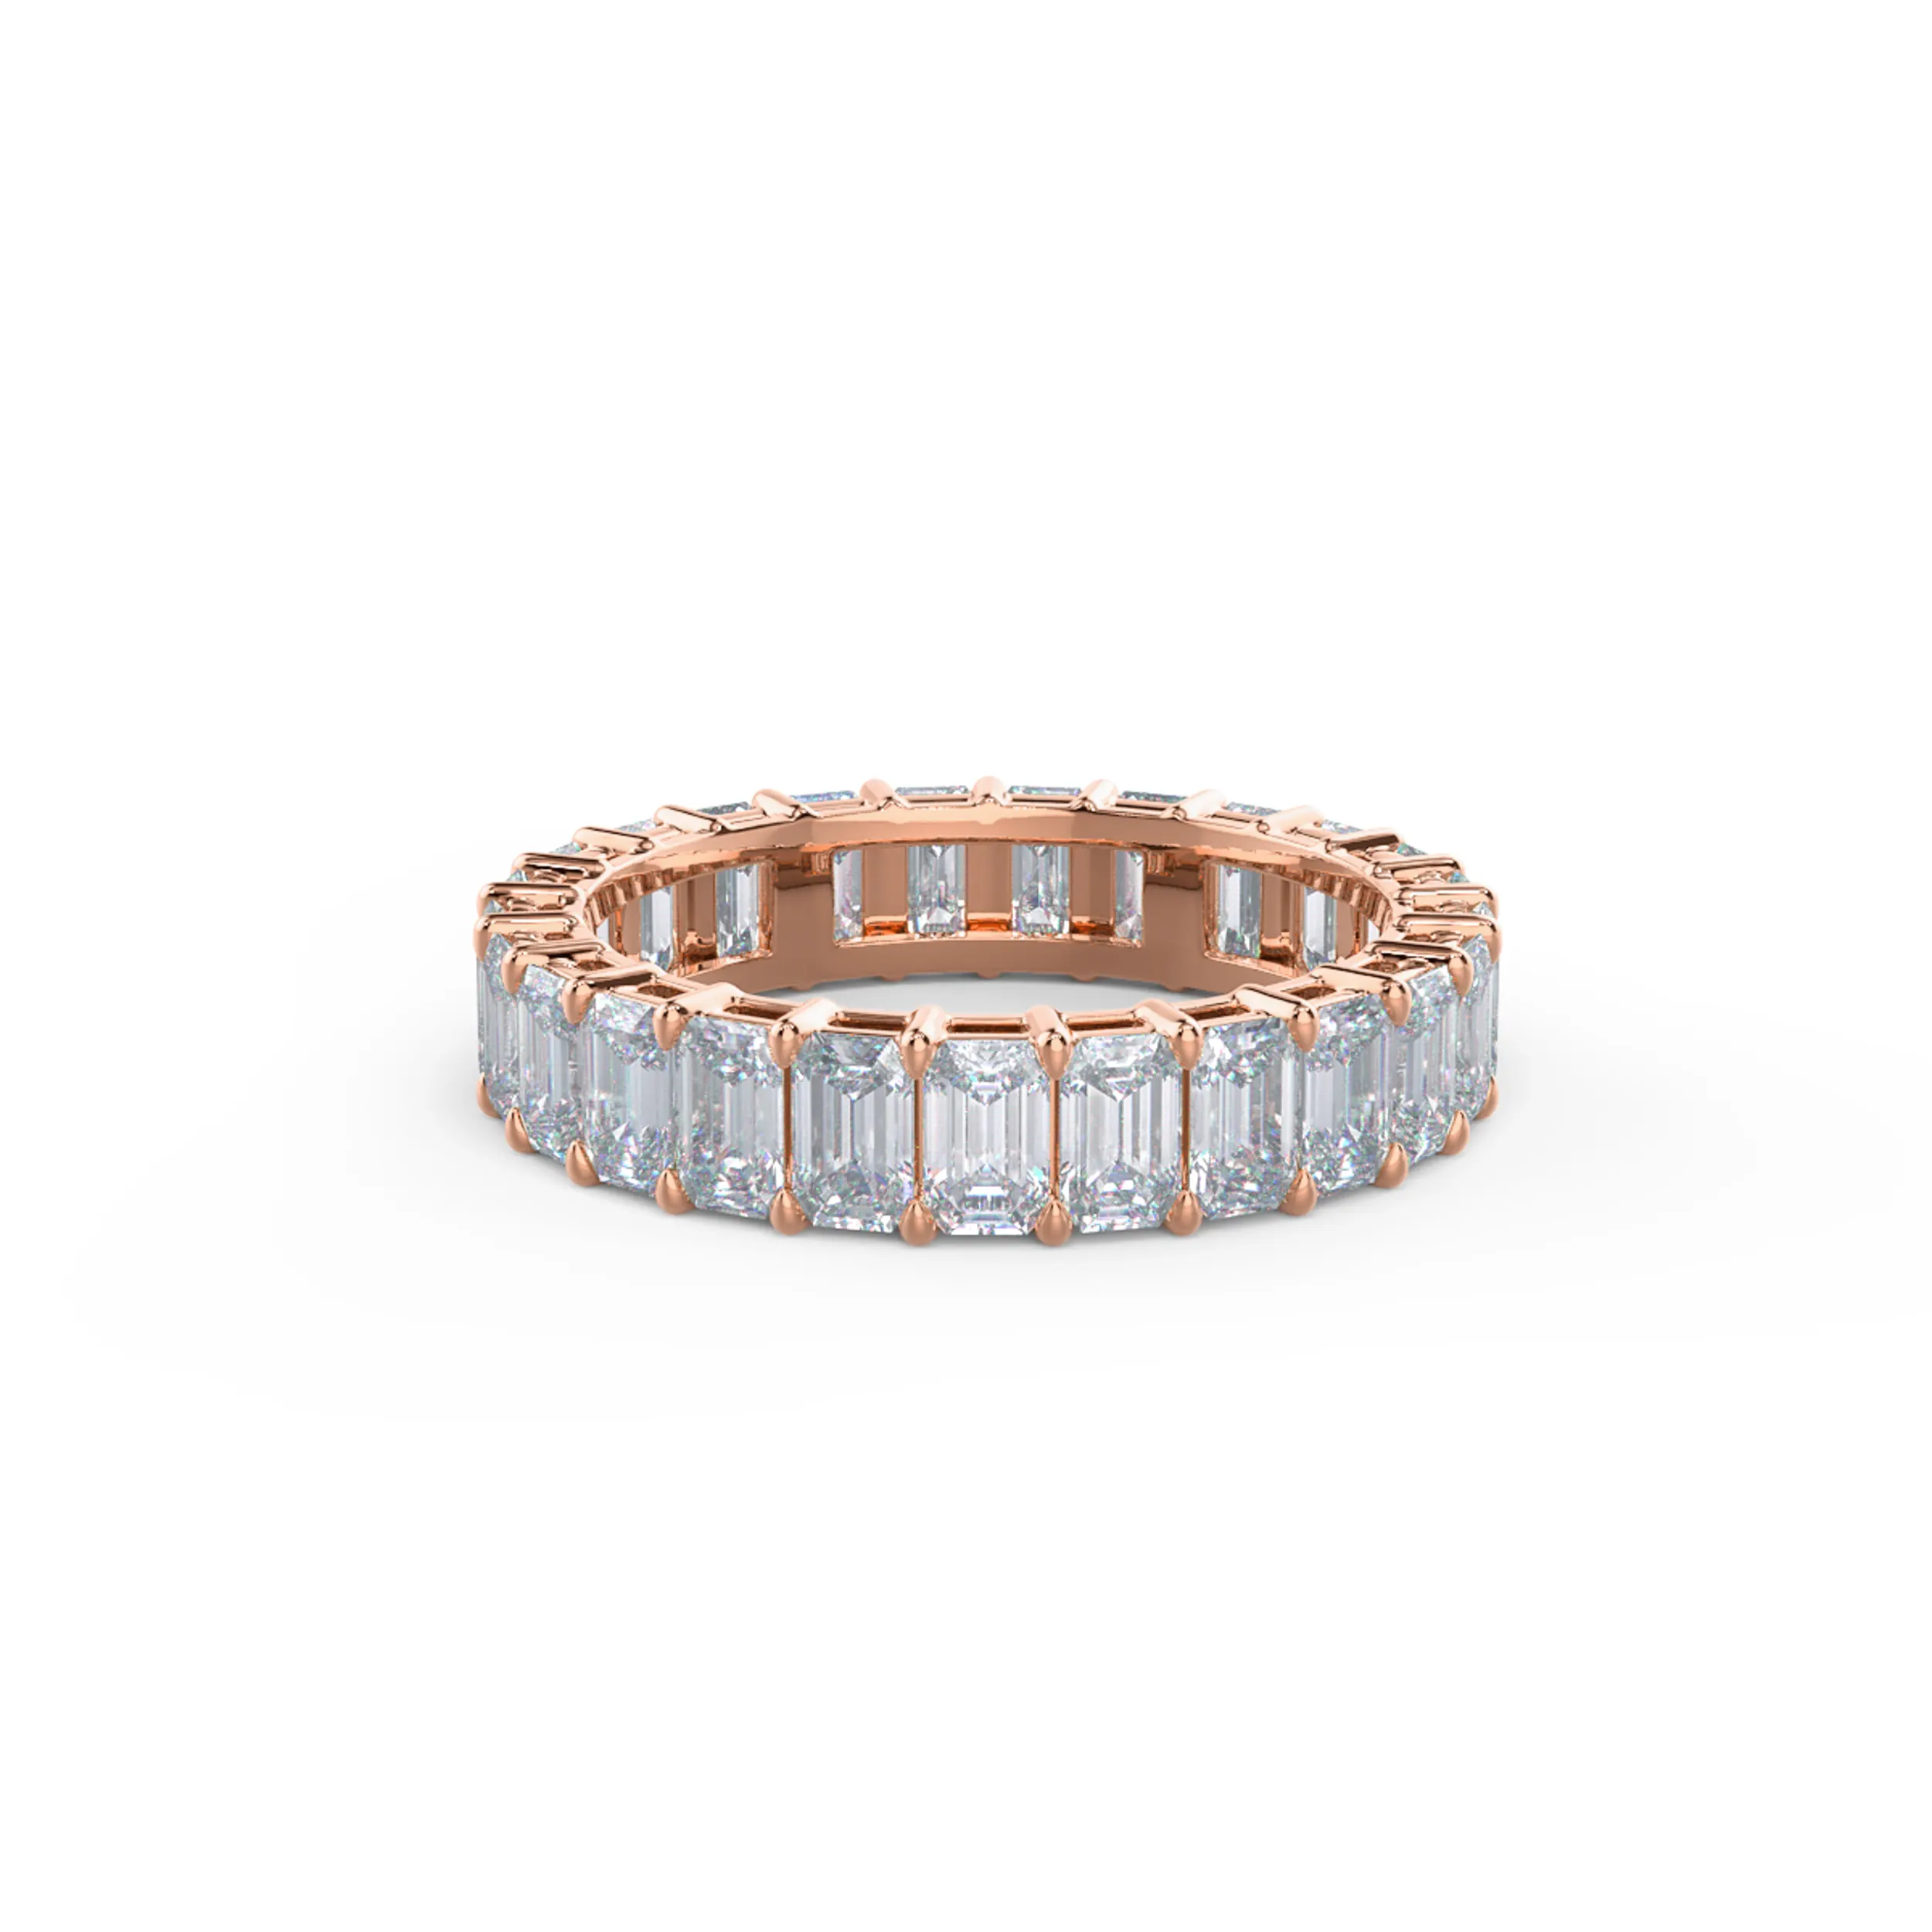 Exceptional Quality 5.0 ct Diamonds Emerald Eternity Band in 14k Rose Gold (Main View)